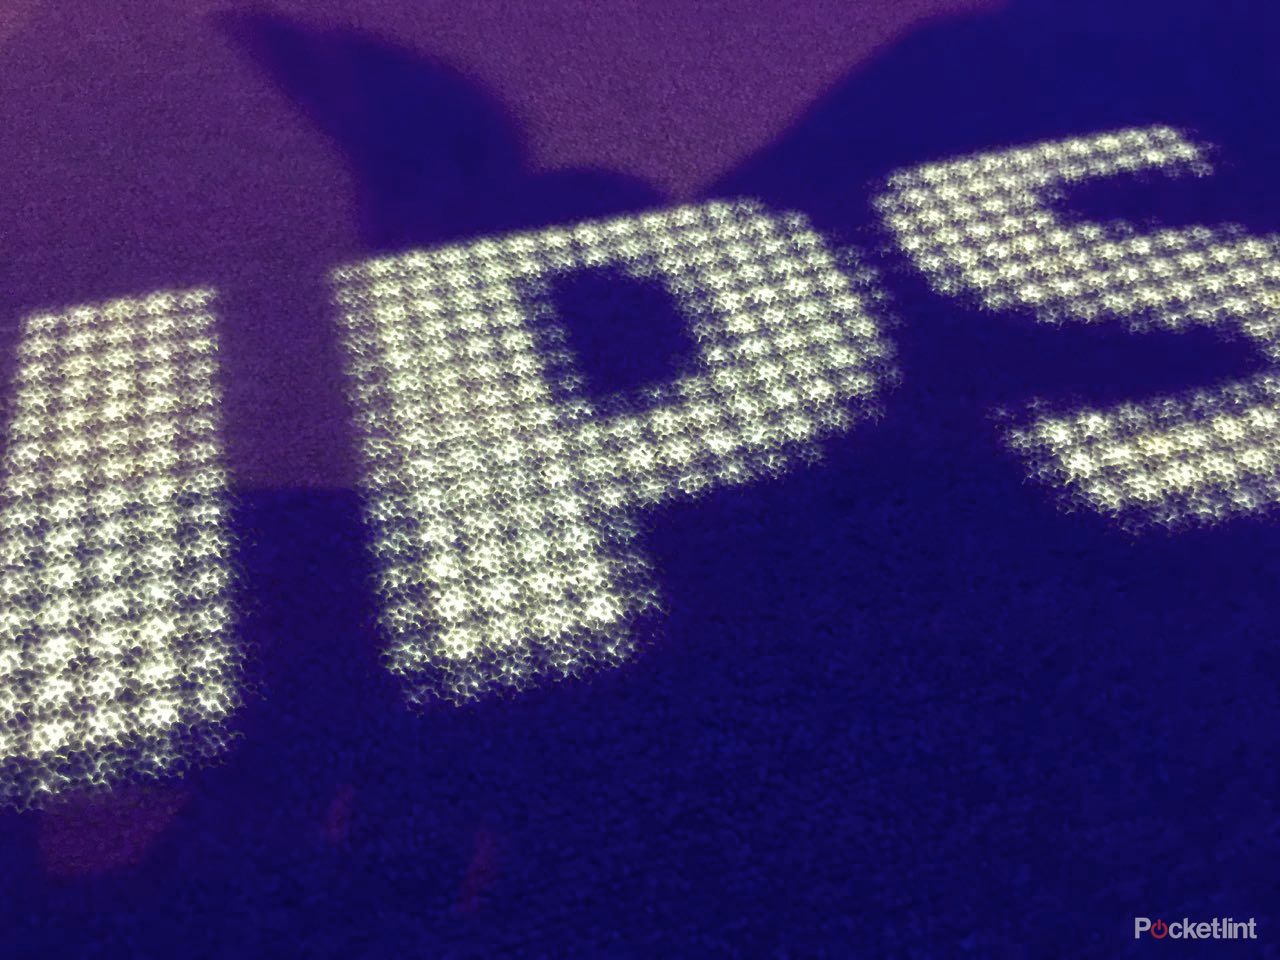 philips led carpet lights your way then disappears just as quick image 2